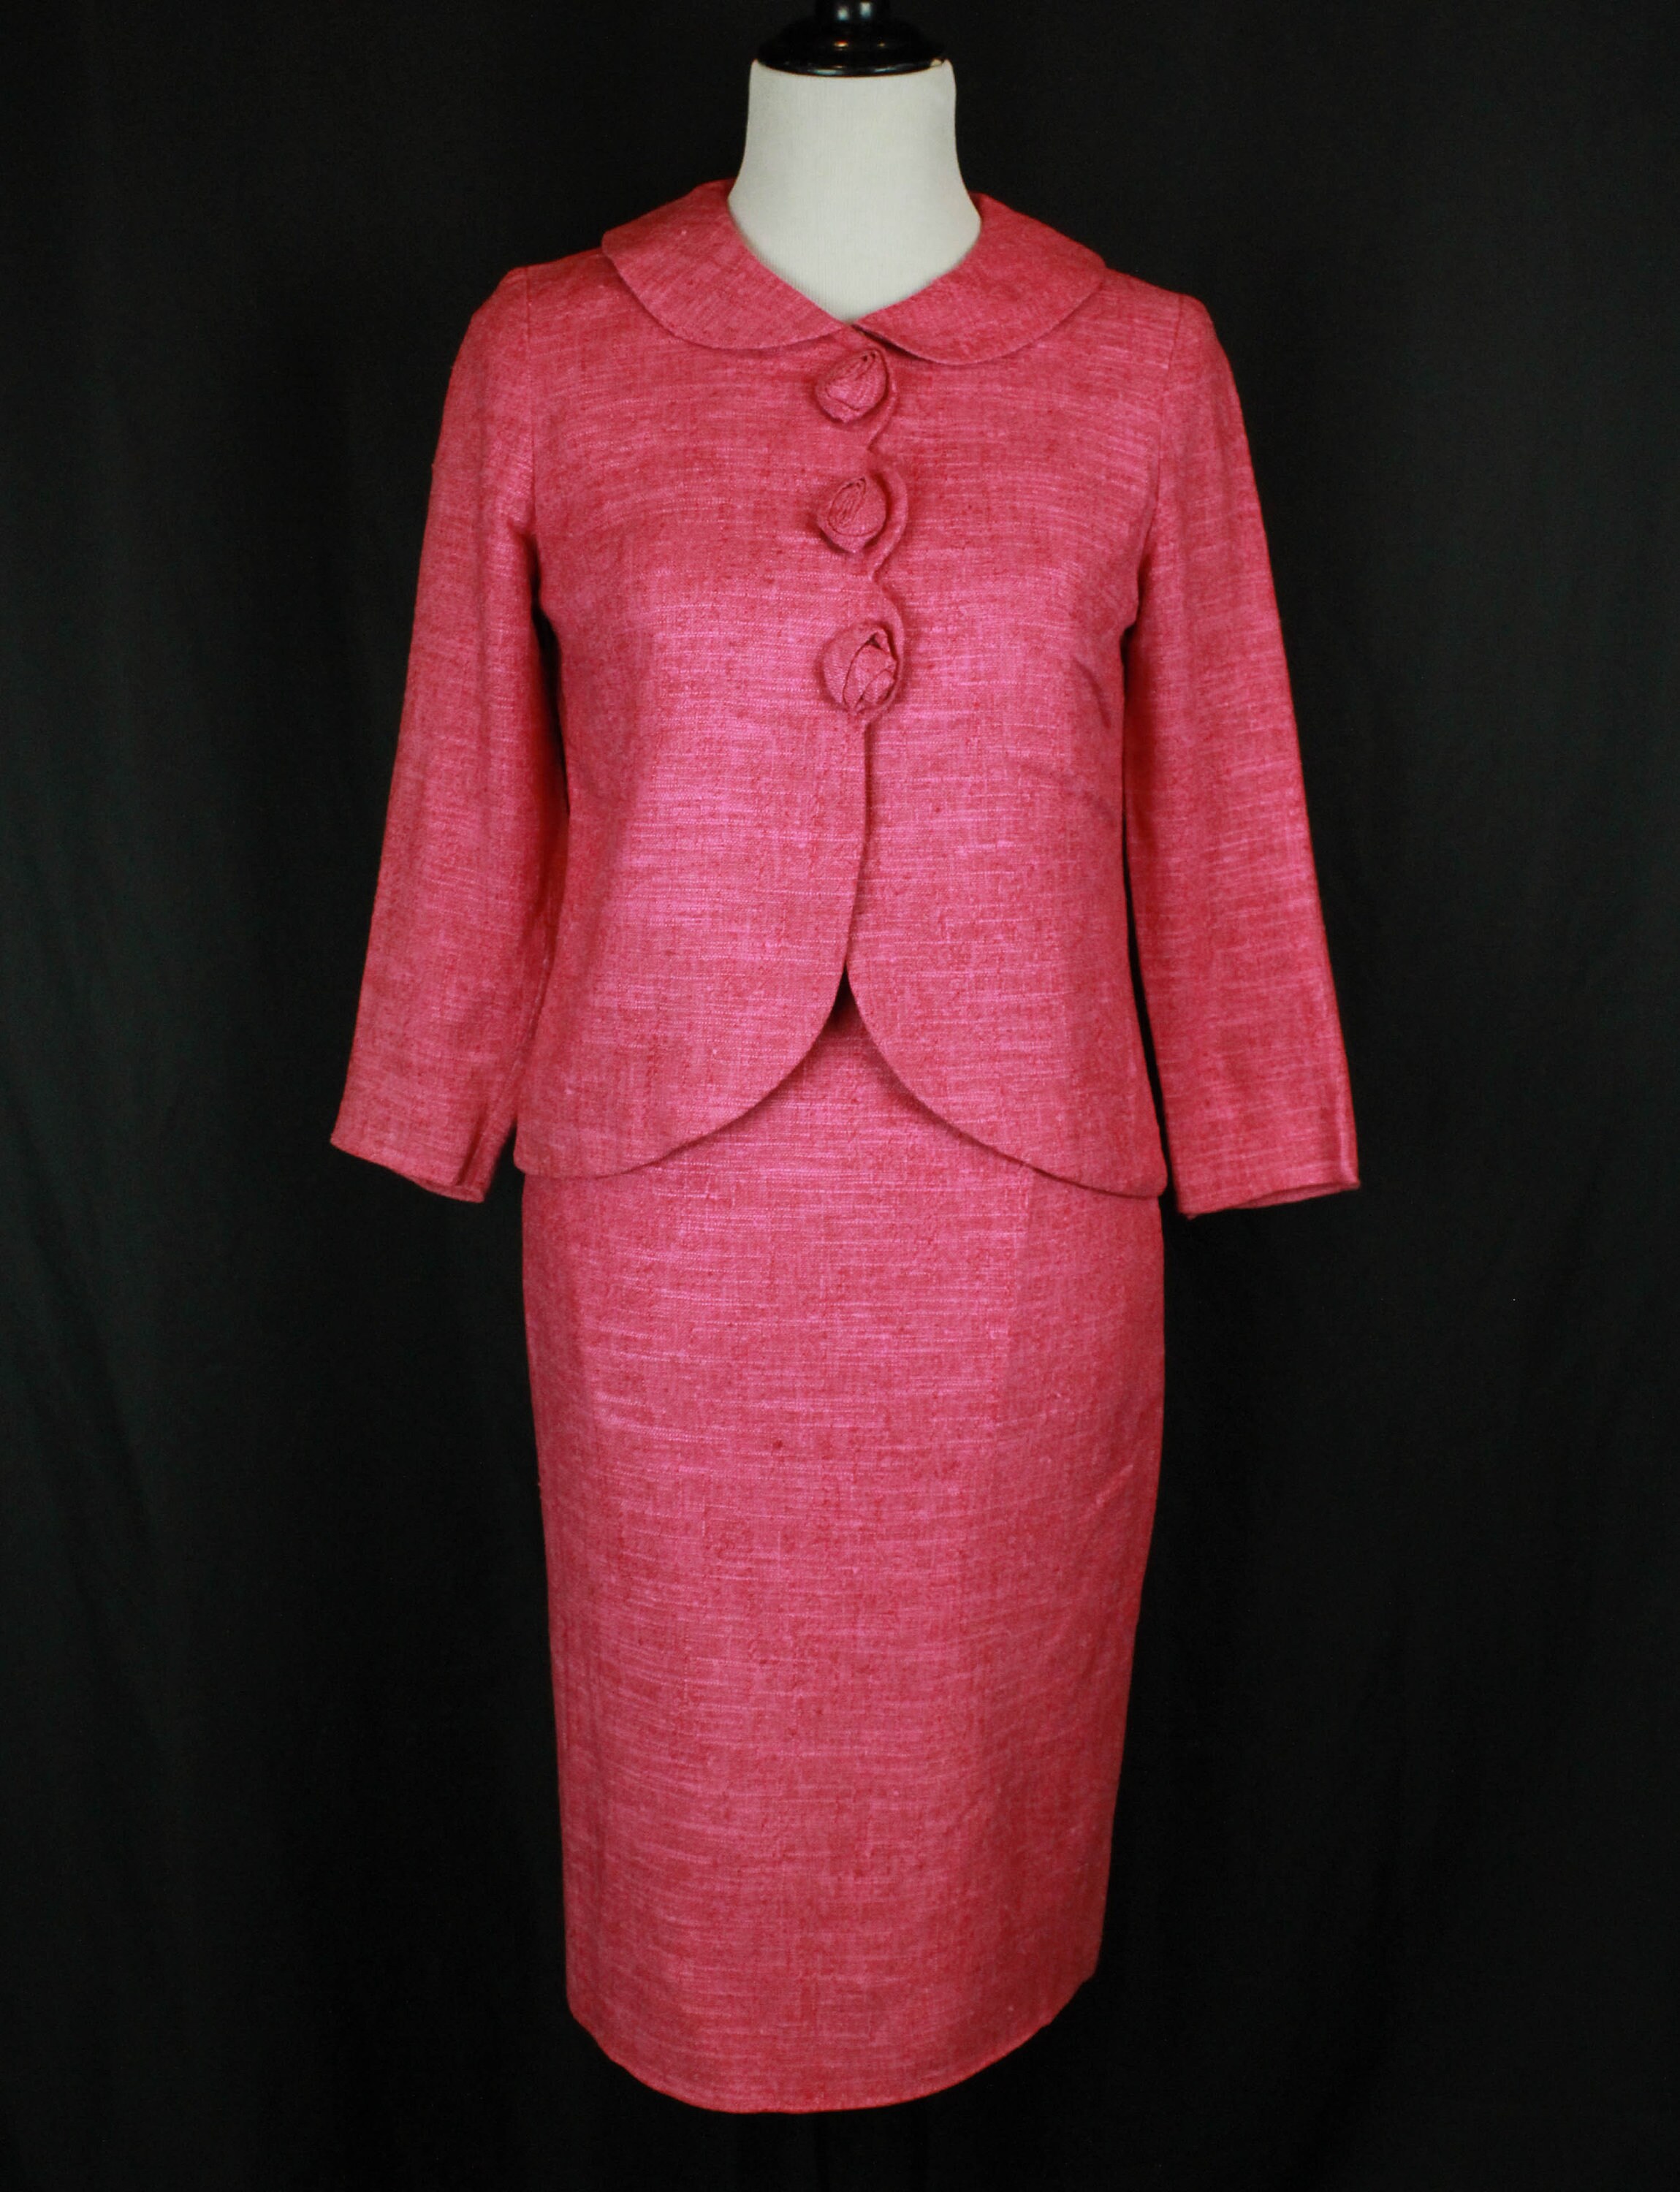 Women's Vintage 50's Pink Jackie O 2 Piece Suit | Etsy